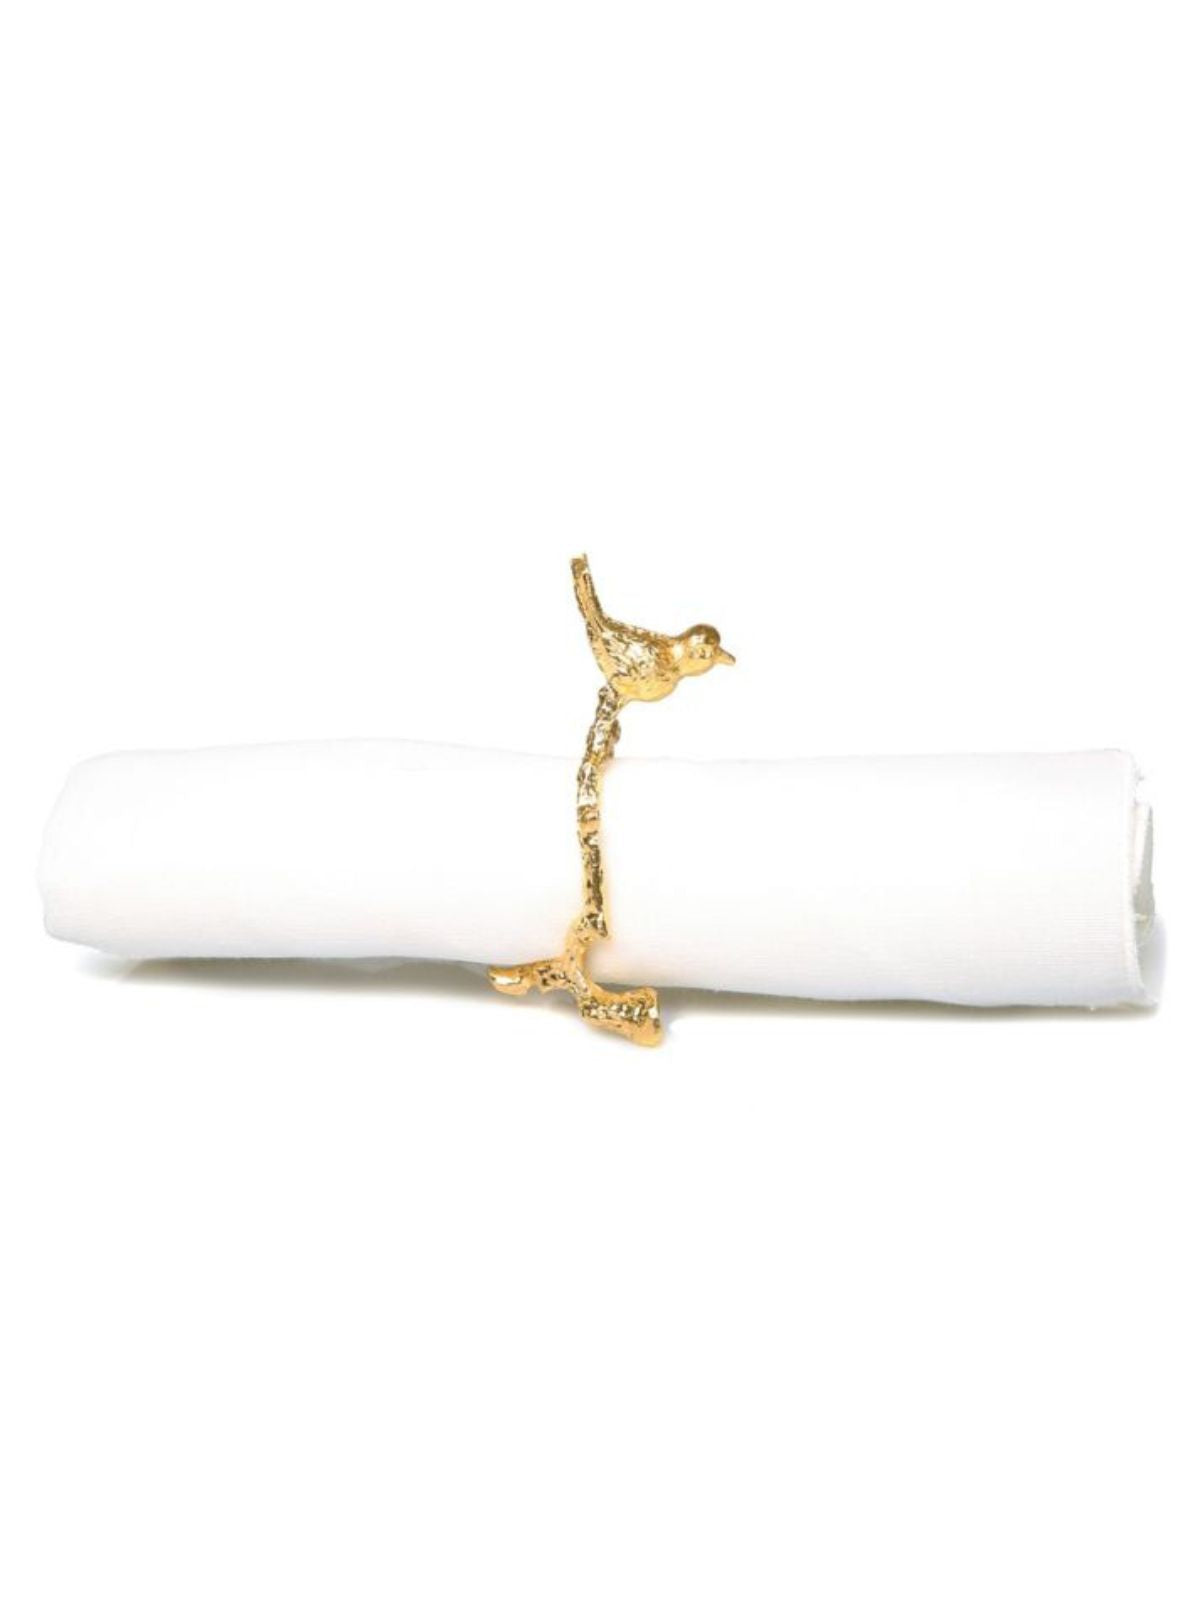 Set of 4 Gold Bird On Twig Designed Stainless Steel Napkin Rings Sold by KYA Home Decor.